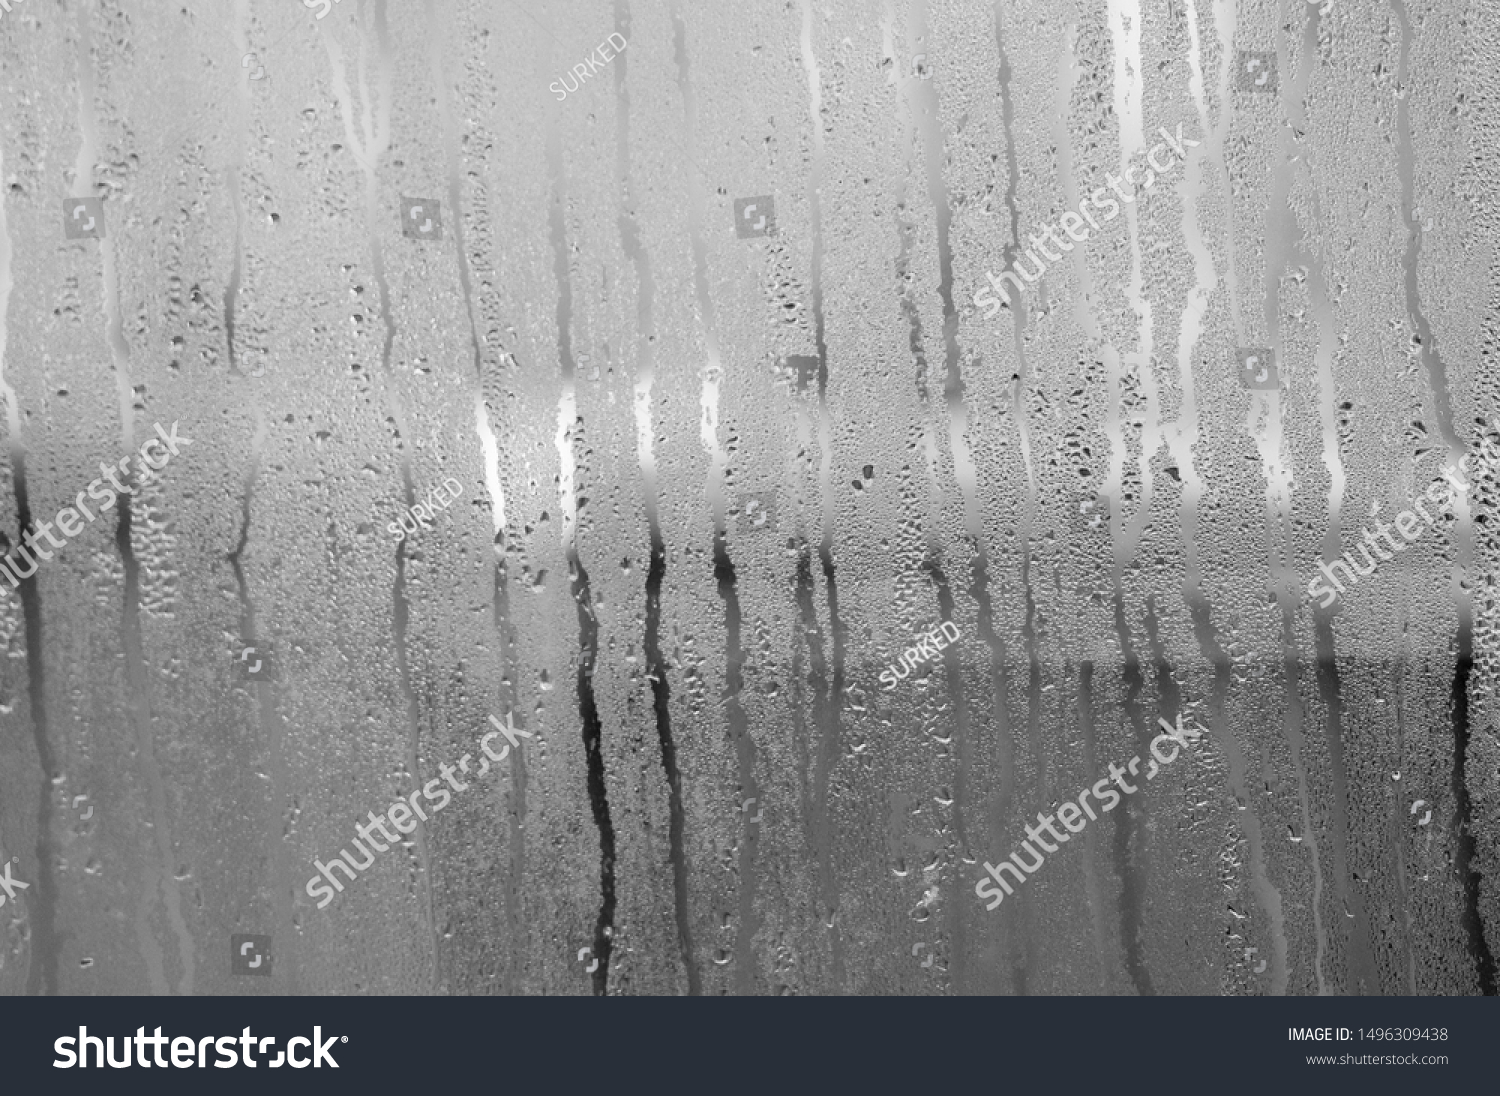 Transparent Glass with drops of water and can see through the glass outside but it is not clear. Vapour or steam on mirror when raining #1496309438